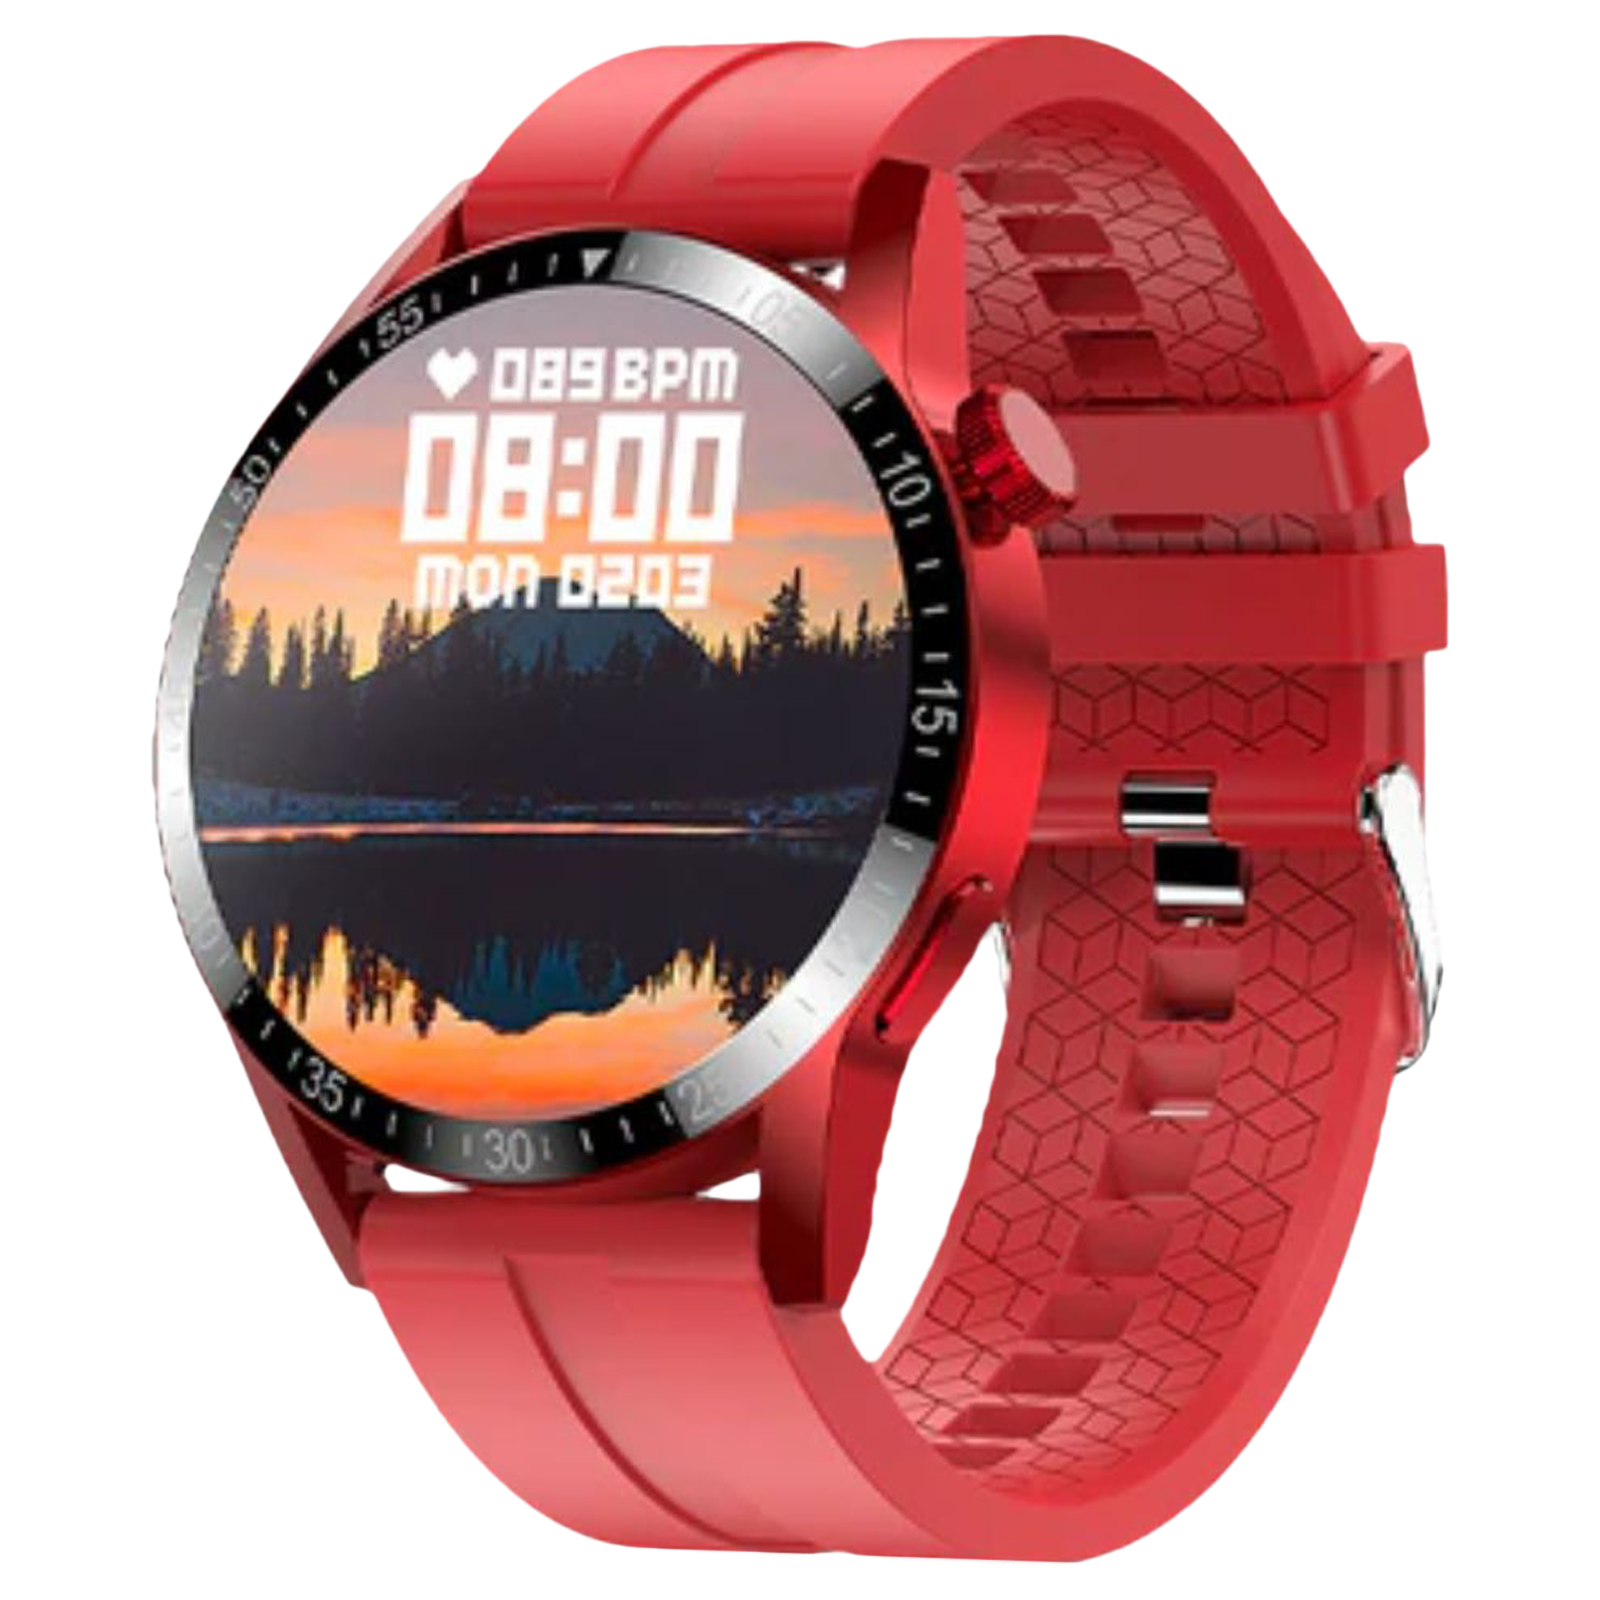 Fire-Boltt Talk Pro Smartwatch with Bluetooth Calling BSW038 RED - Kamal Watch Company